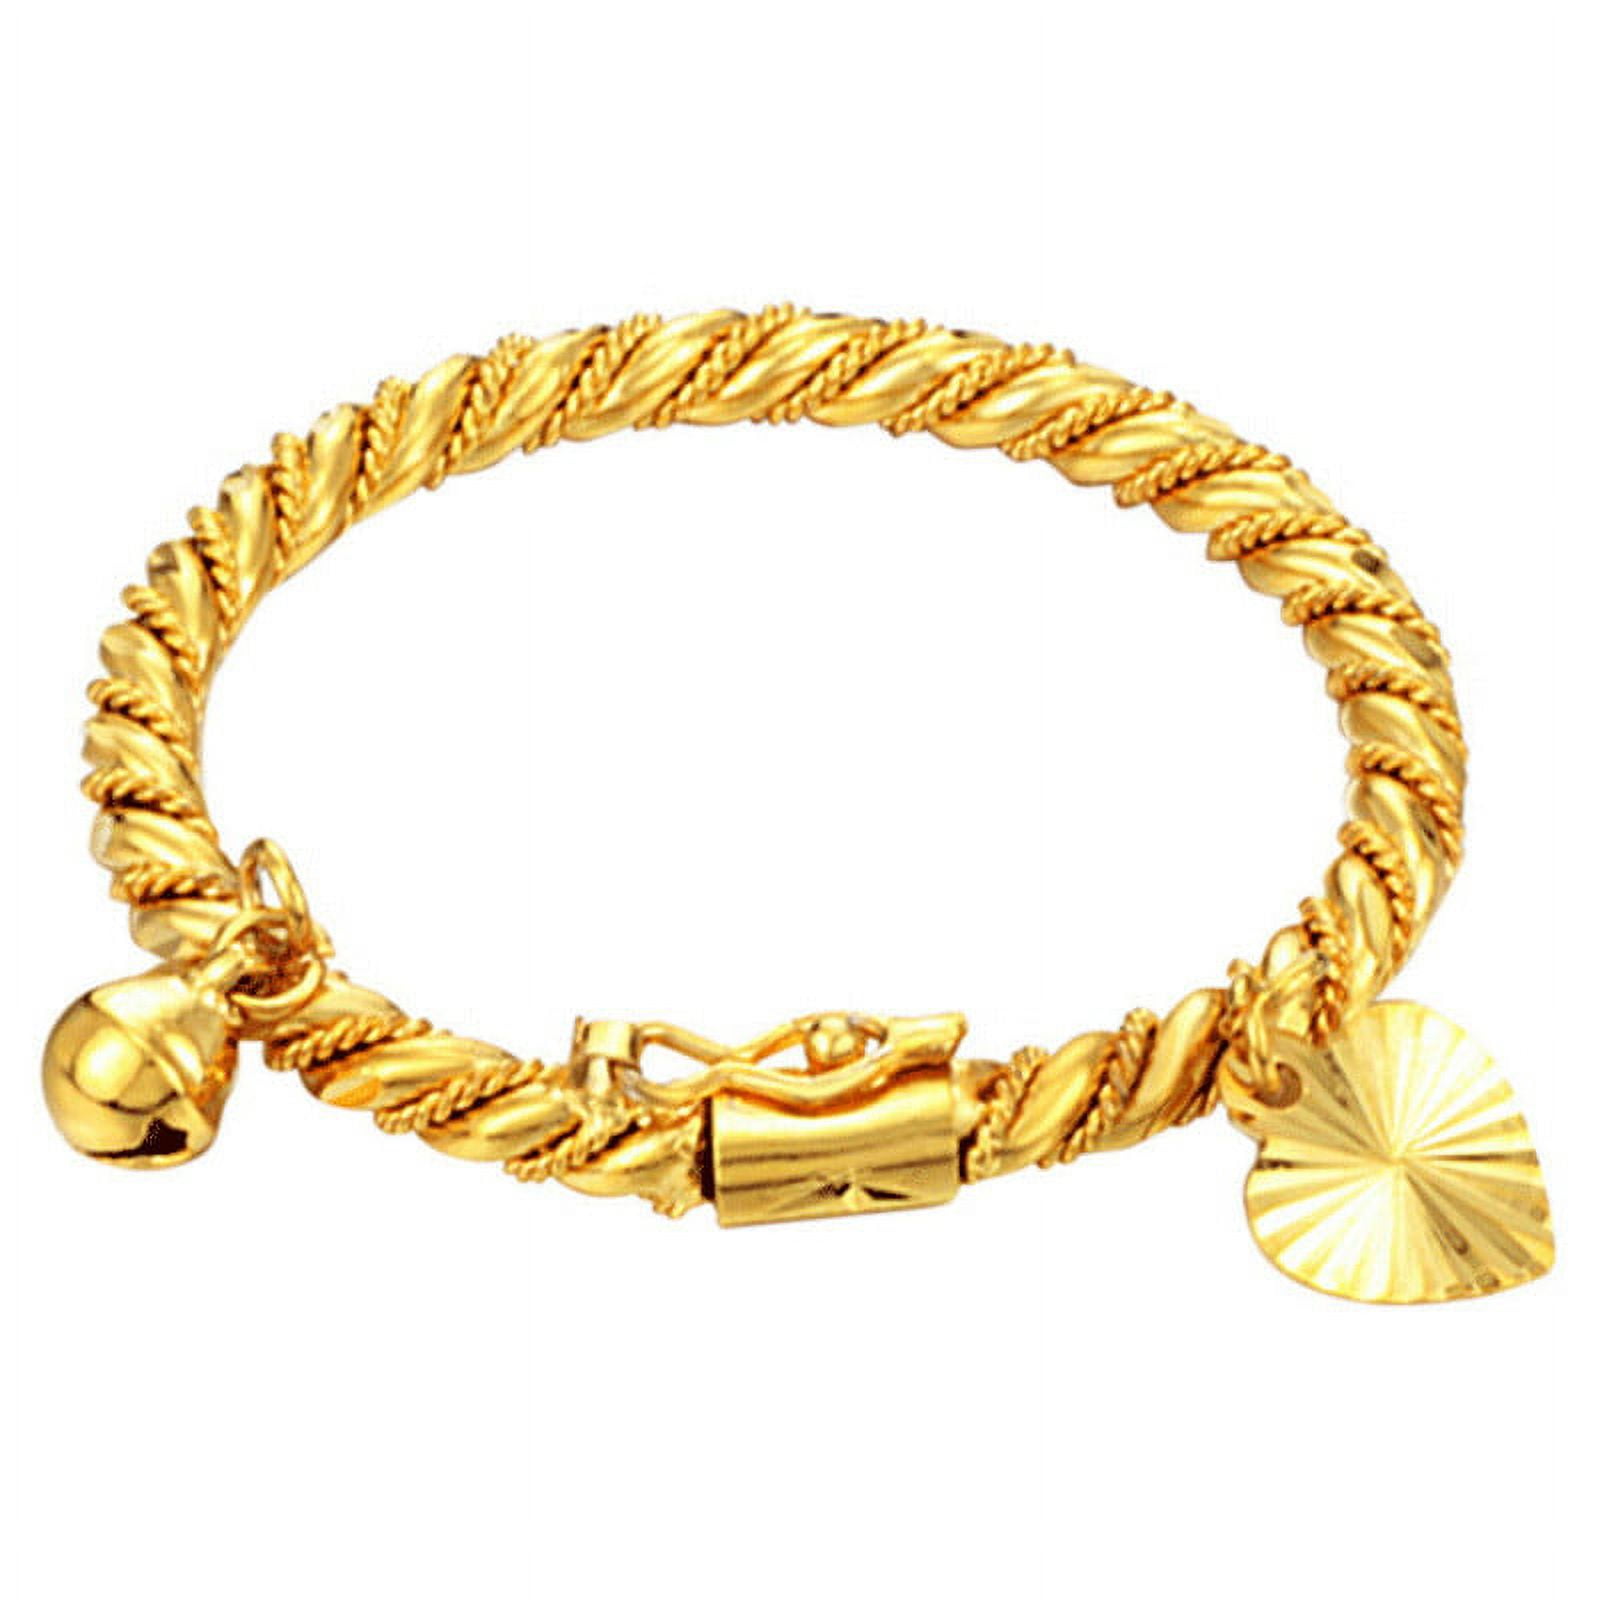 22k Yellow Gold Bracelet For Boys - BrMs24205 - 22k Yellow Gold Bracelet  For Boys. Bracelet is designed with chain style in combination with fine ma